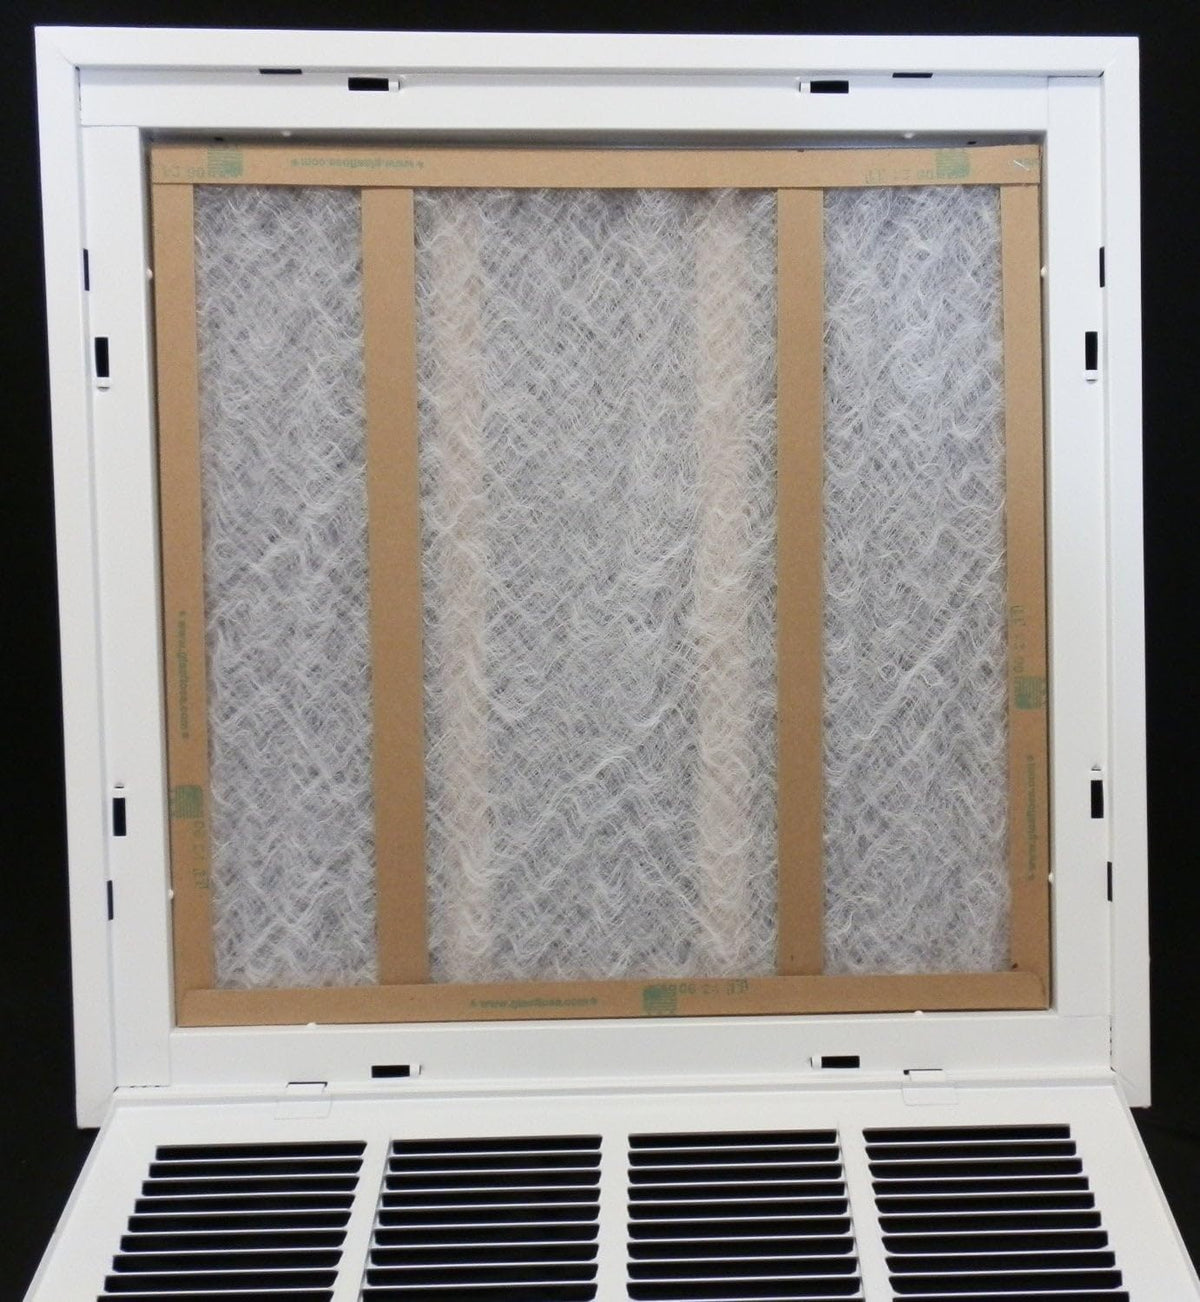 18&quot; X 36&quot; Steel Return Air Filter Grille for 1&quot; Filter - Removable Frame - [Outer Dimensions: 20 5/8&quot; X 38 5/8&quot;]